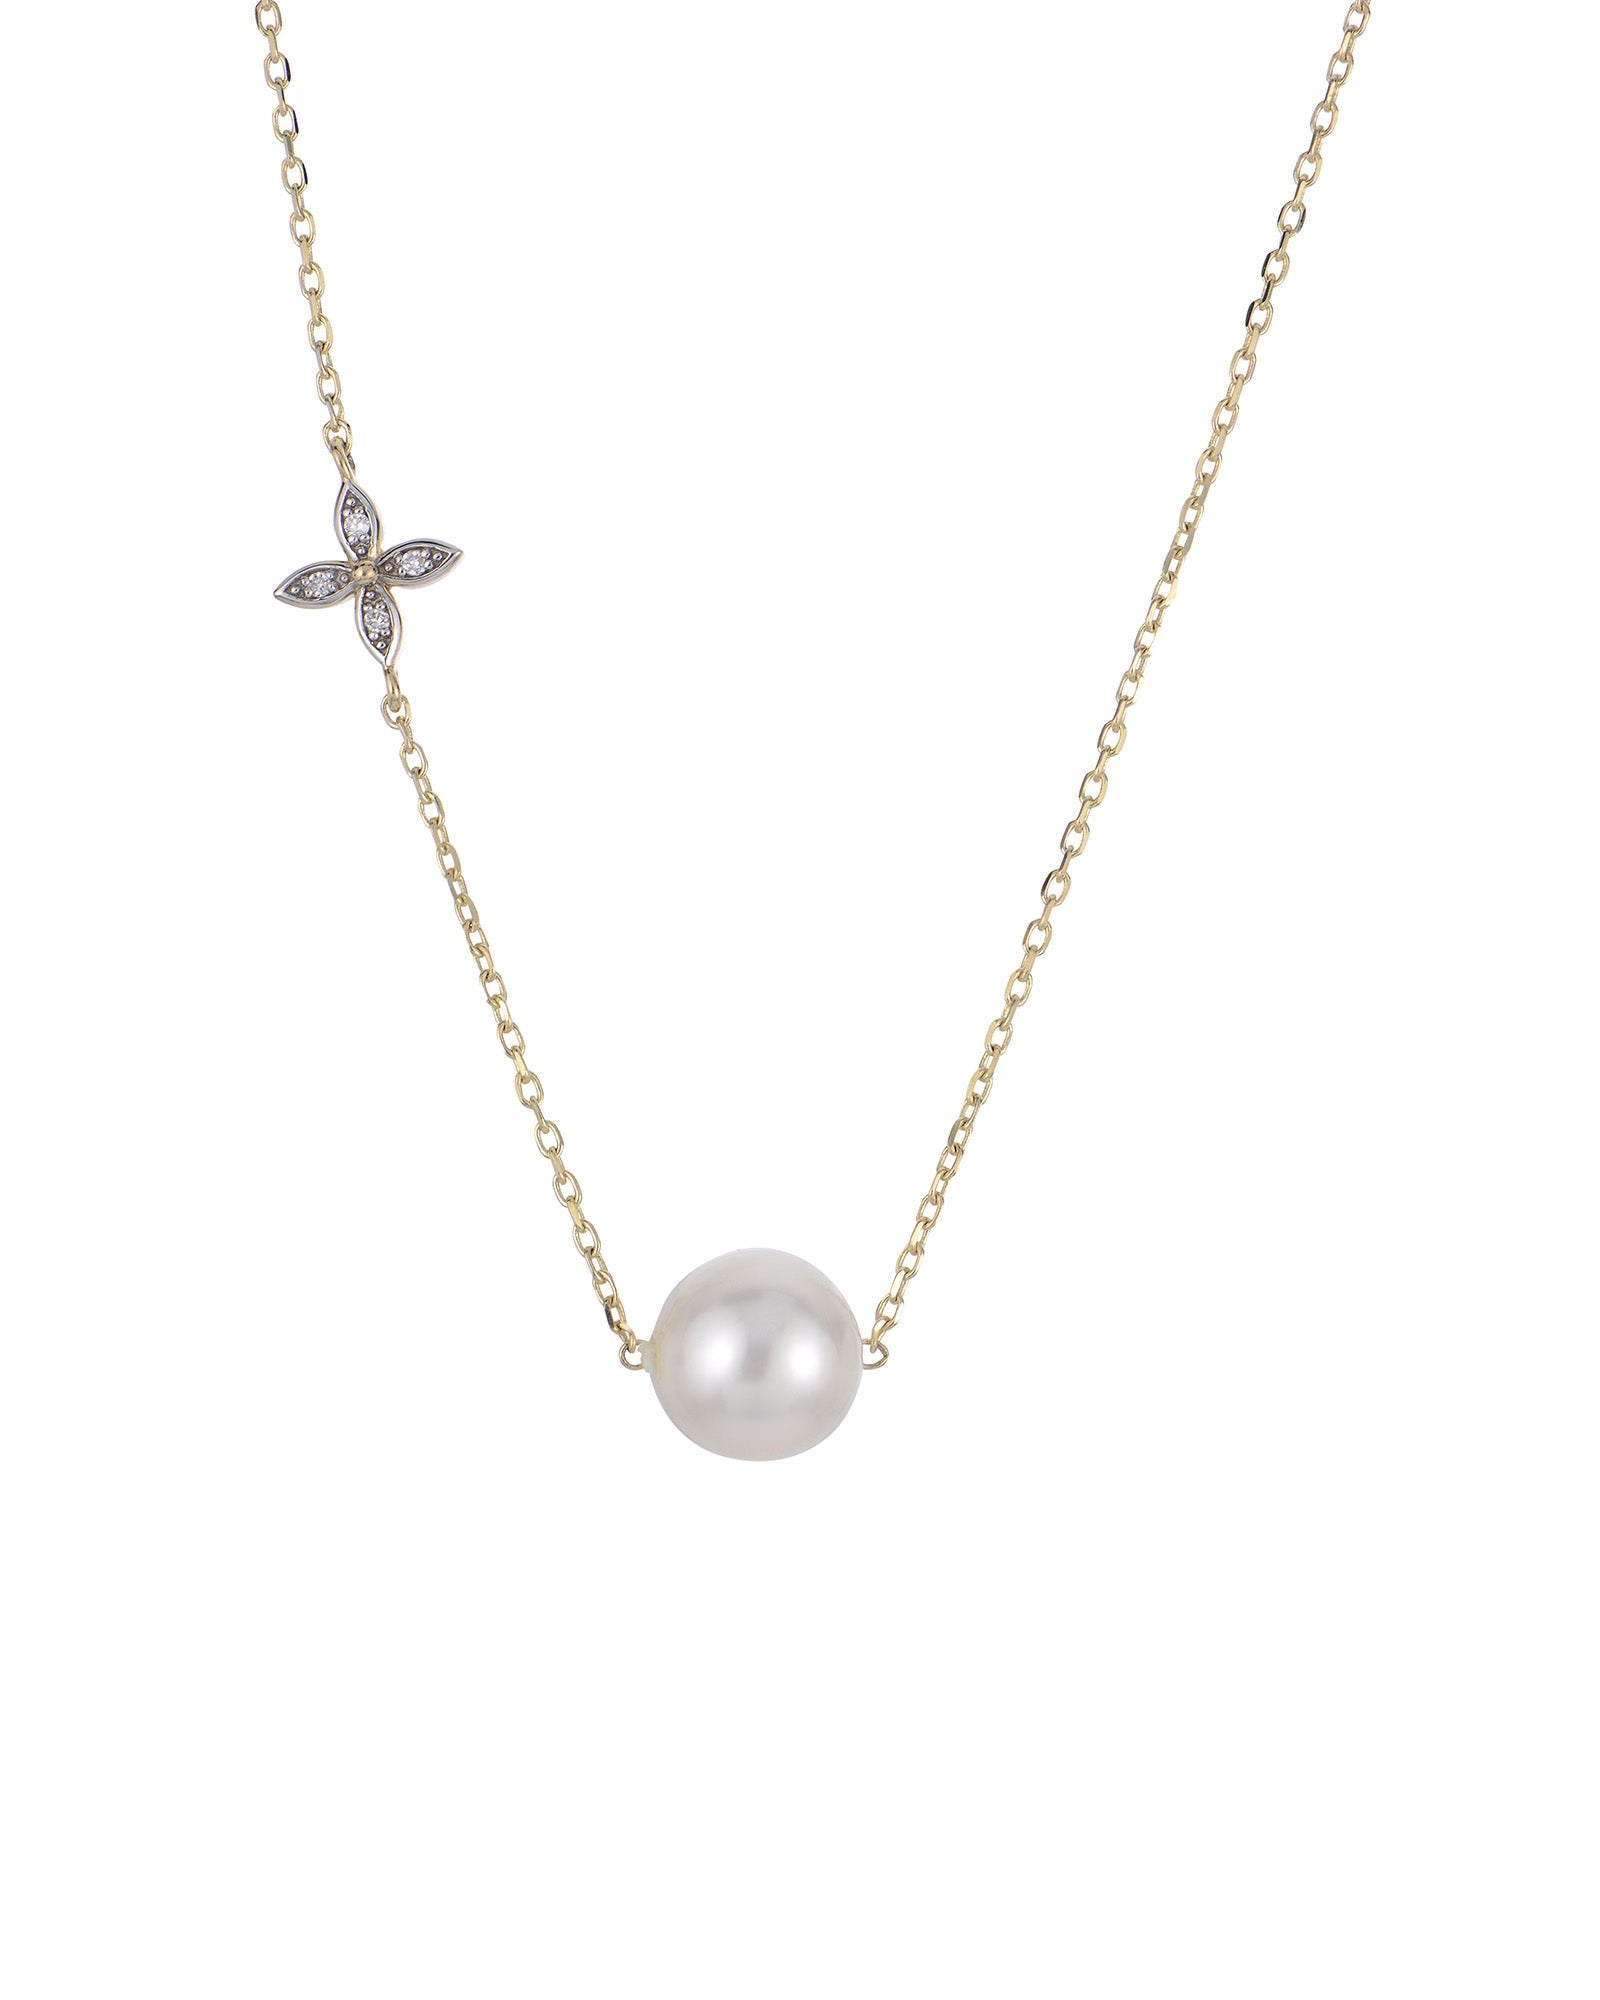 Pearl and Petals Necklace